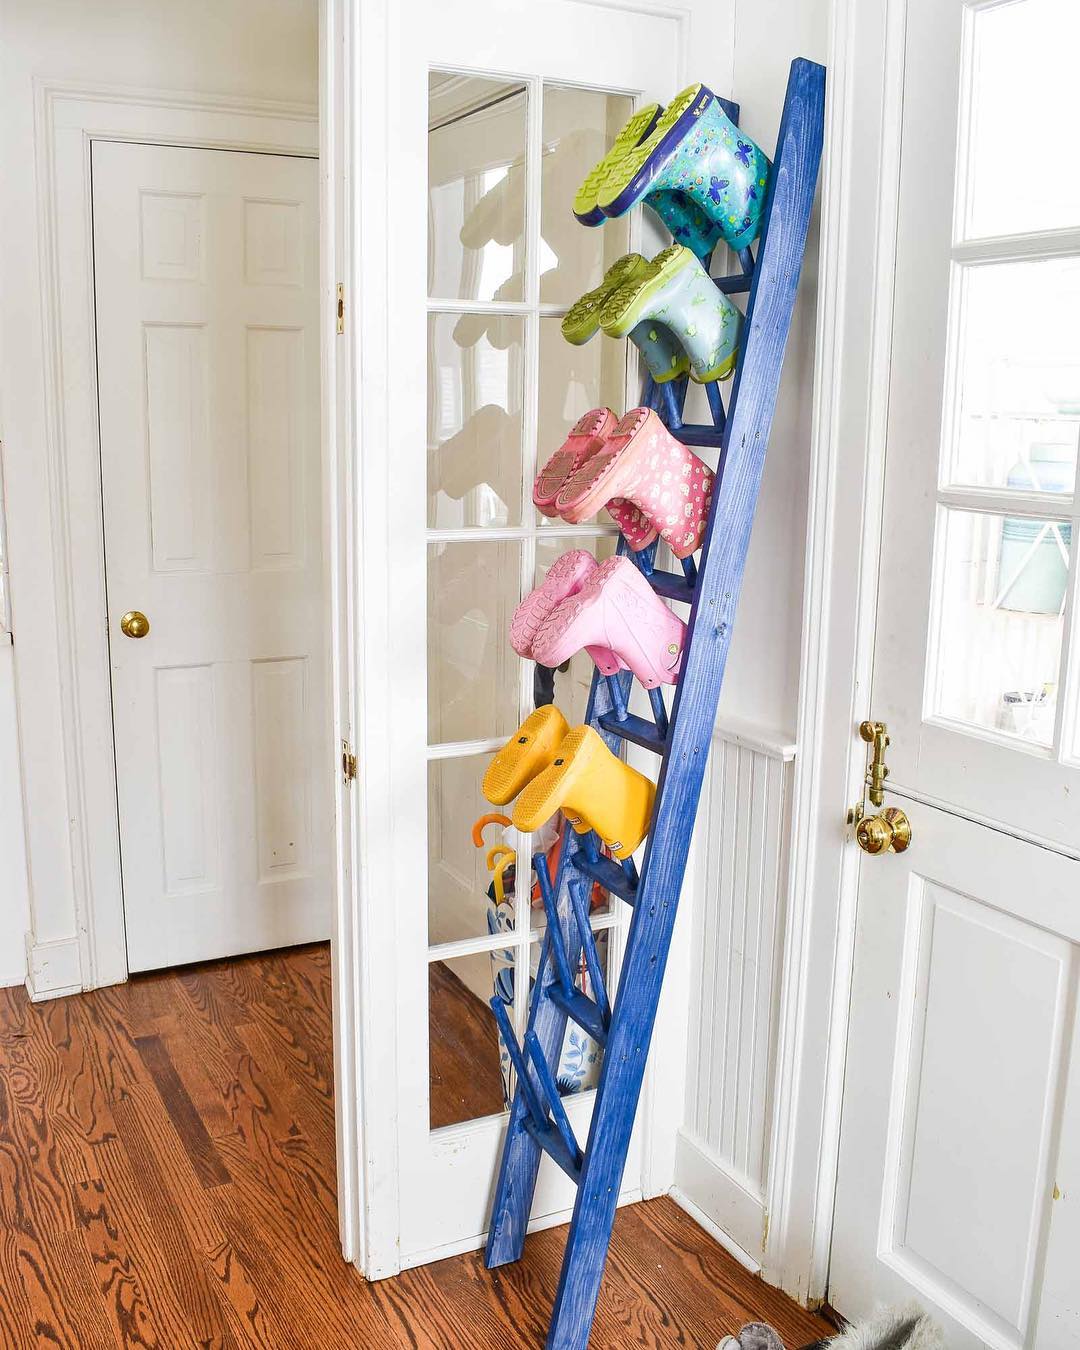 Ladder Repurposed for Boot Storage. Photo by Instagram user @atcharlotteshouse